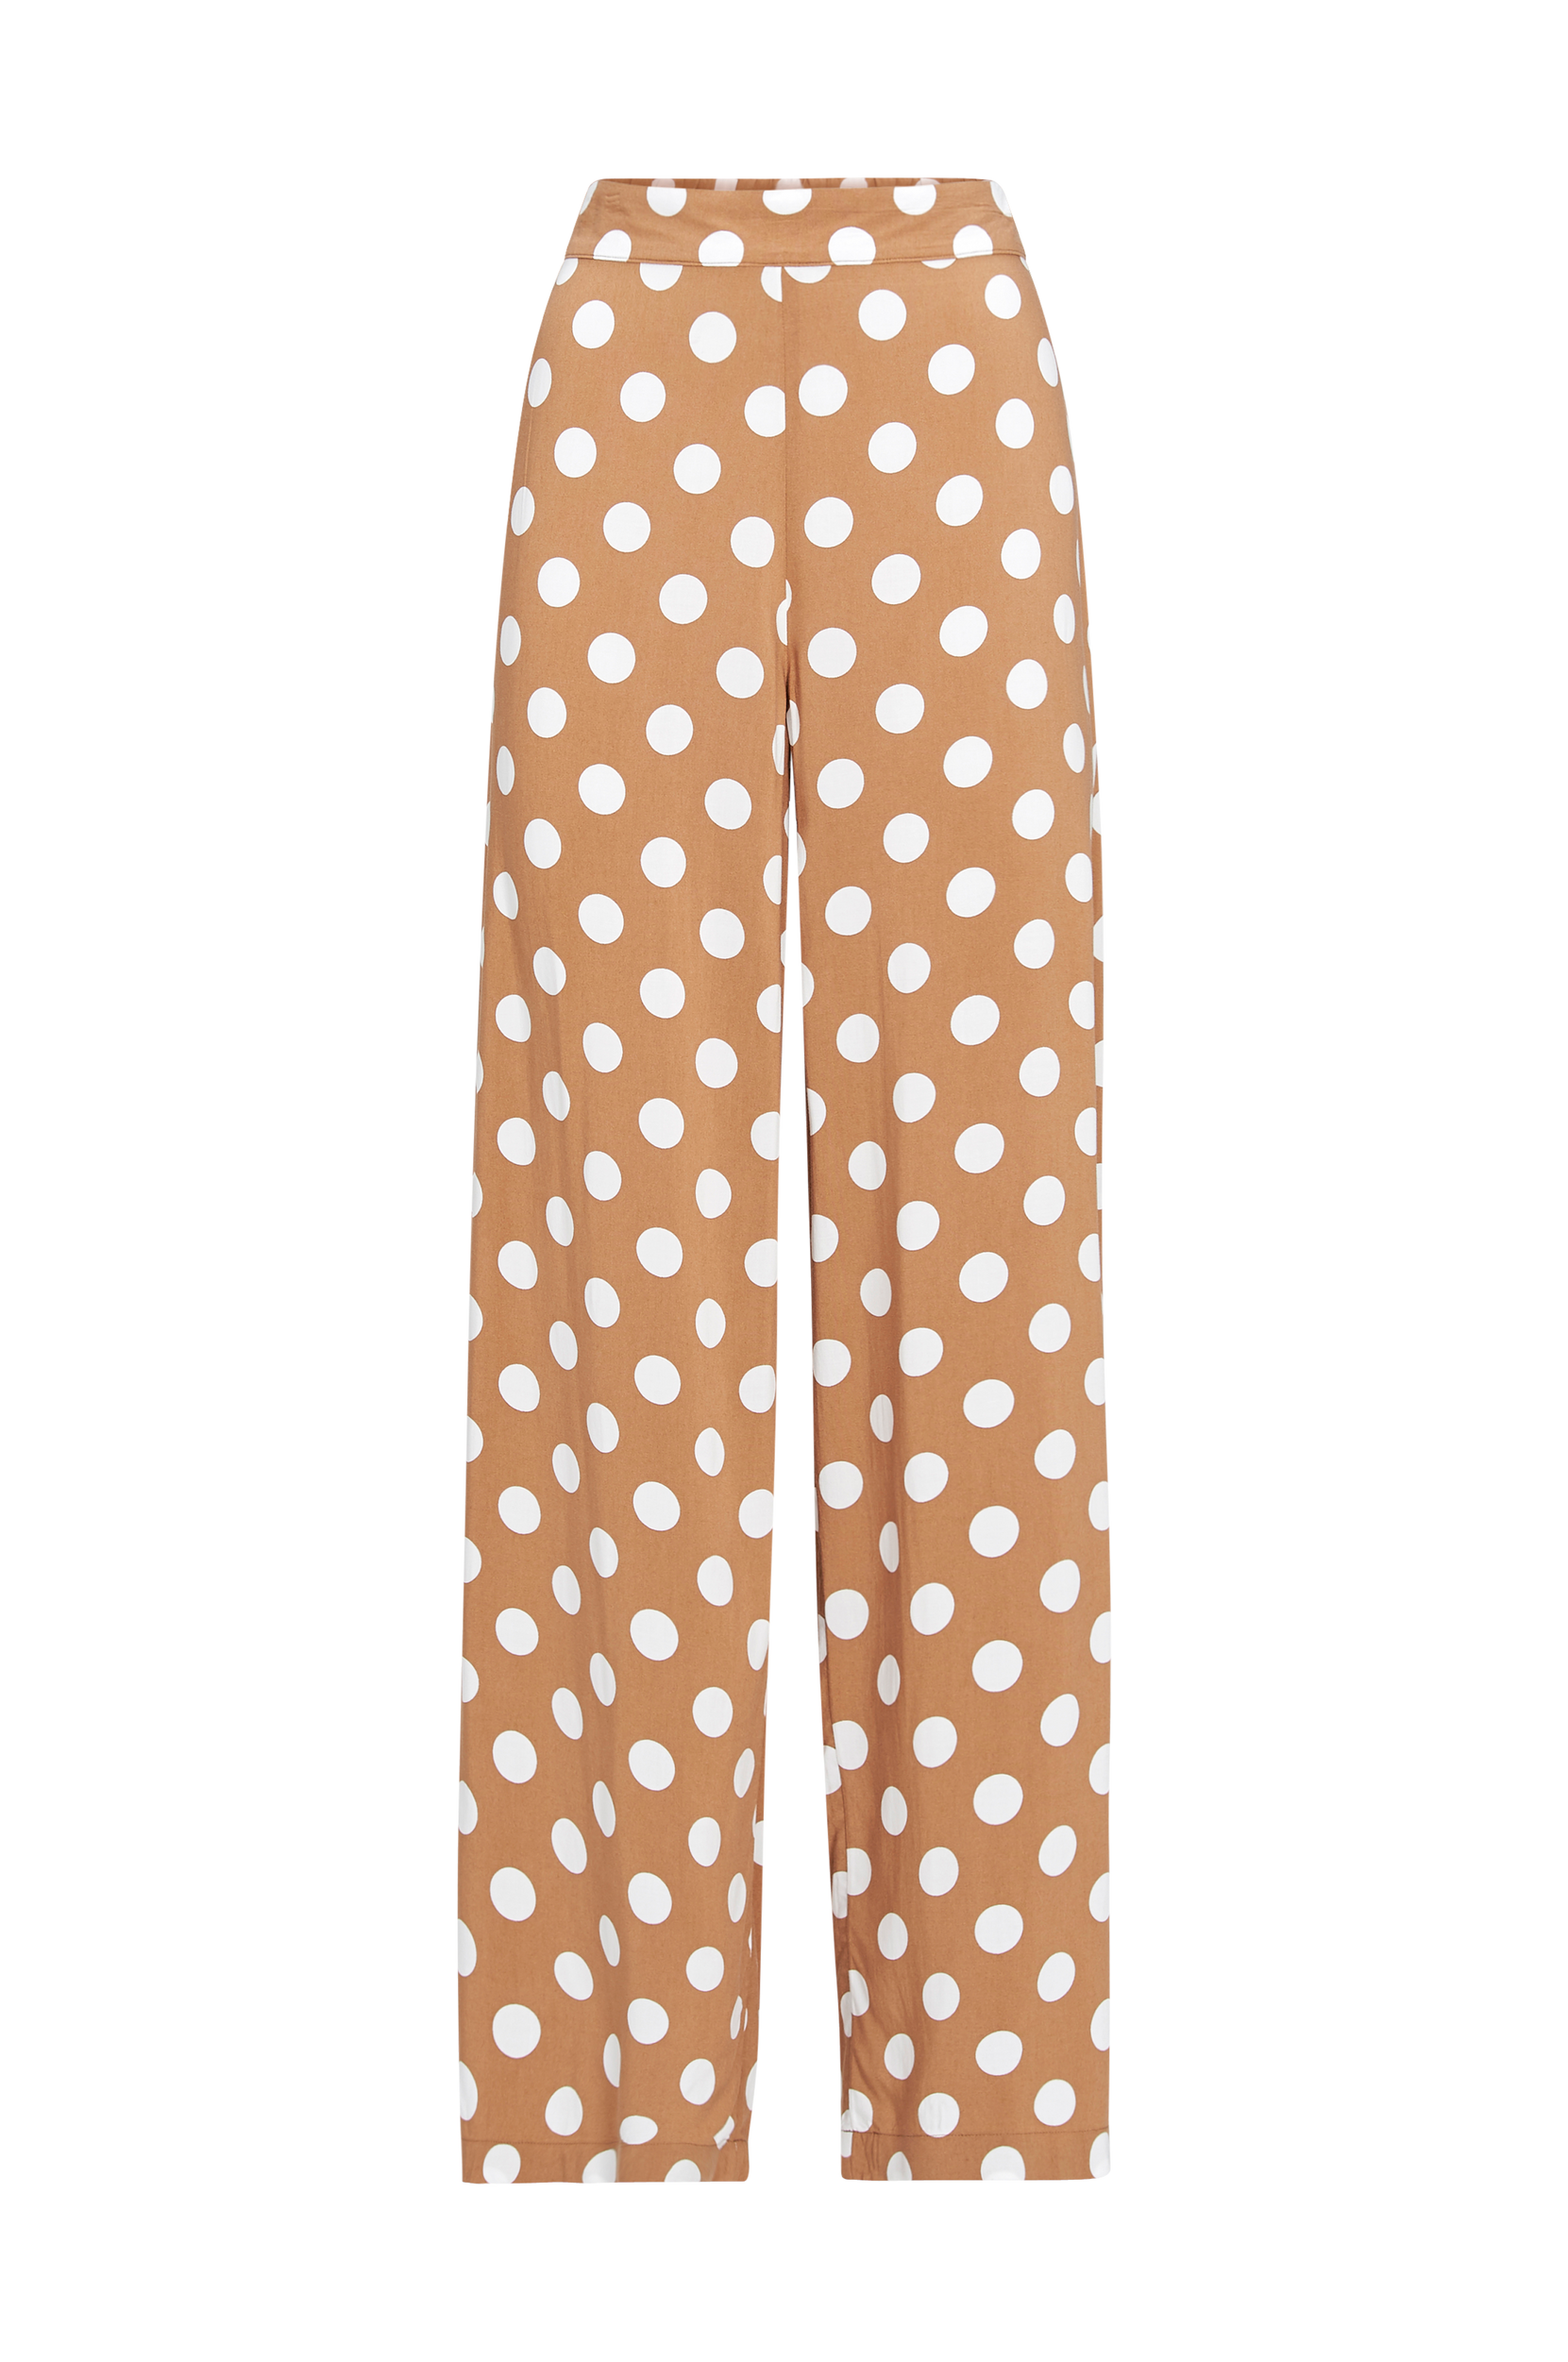 Elly Trousers housut, Gina Tricot